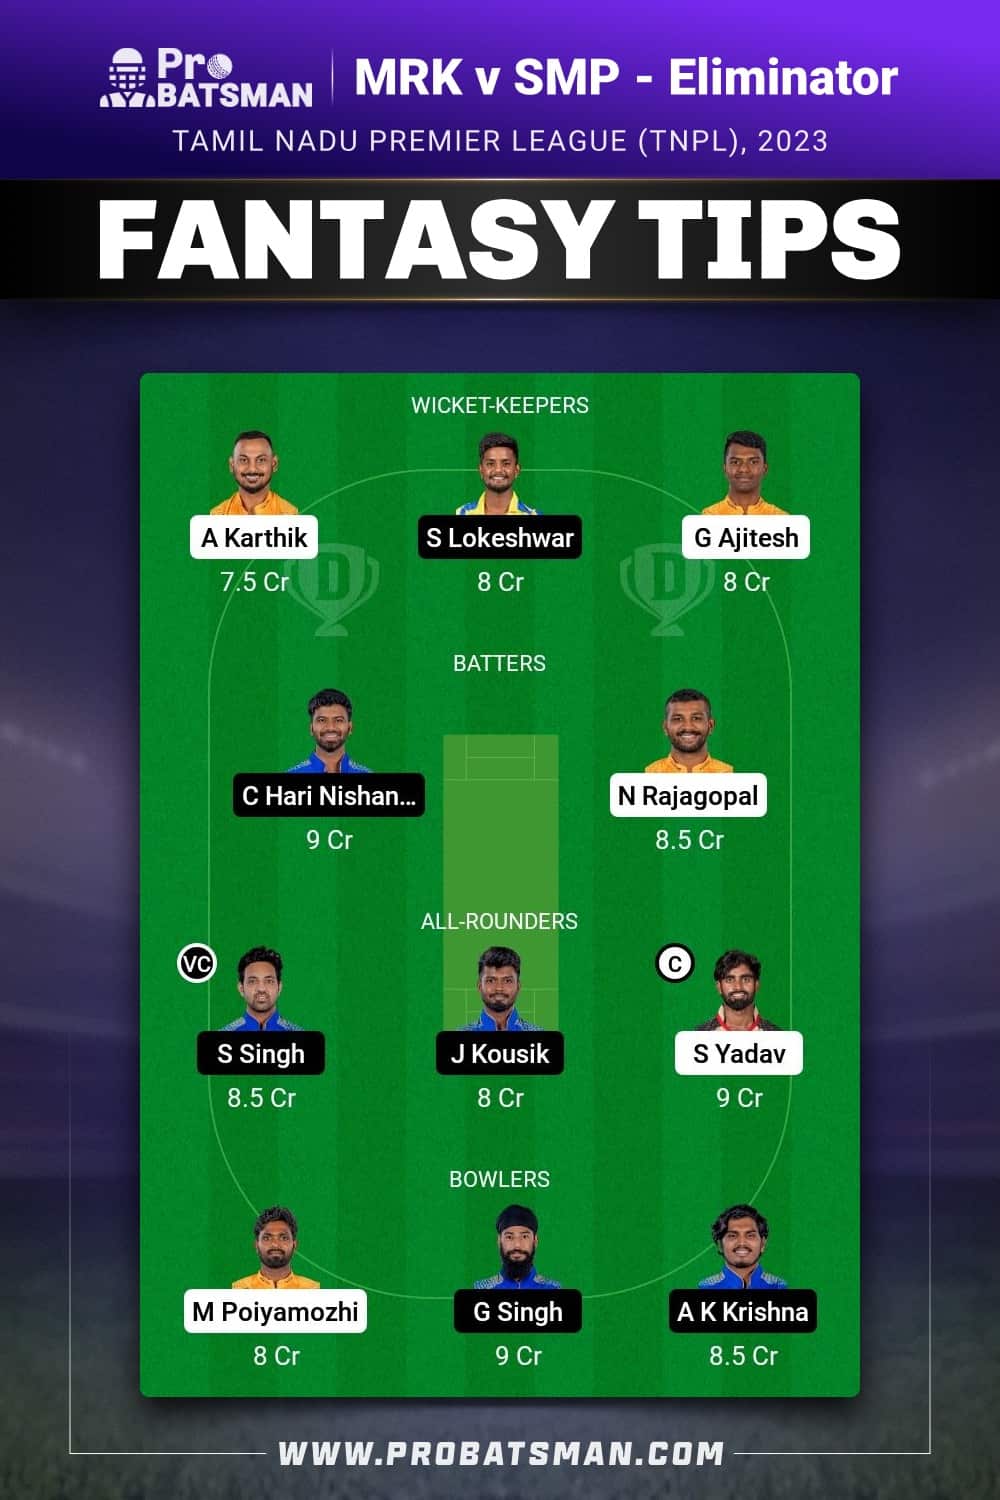 NRK vs SMP Dream11 Prediction With Stats, Pitch Report & Player Record of Tamil Nadu Premier League (TNPL), 2023 For Eliminator